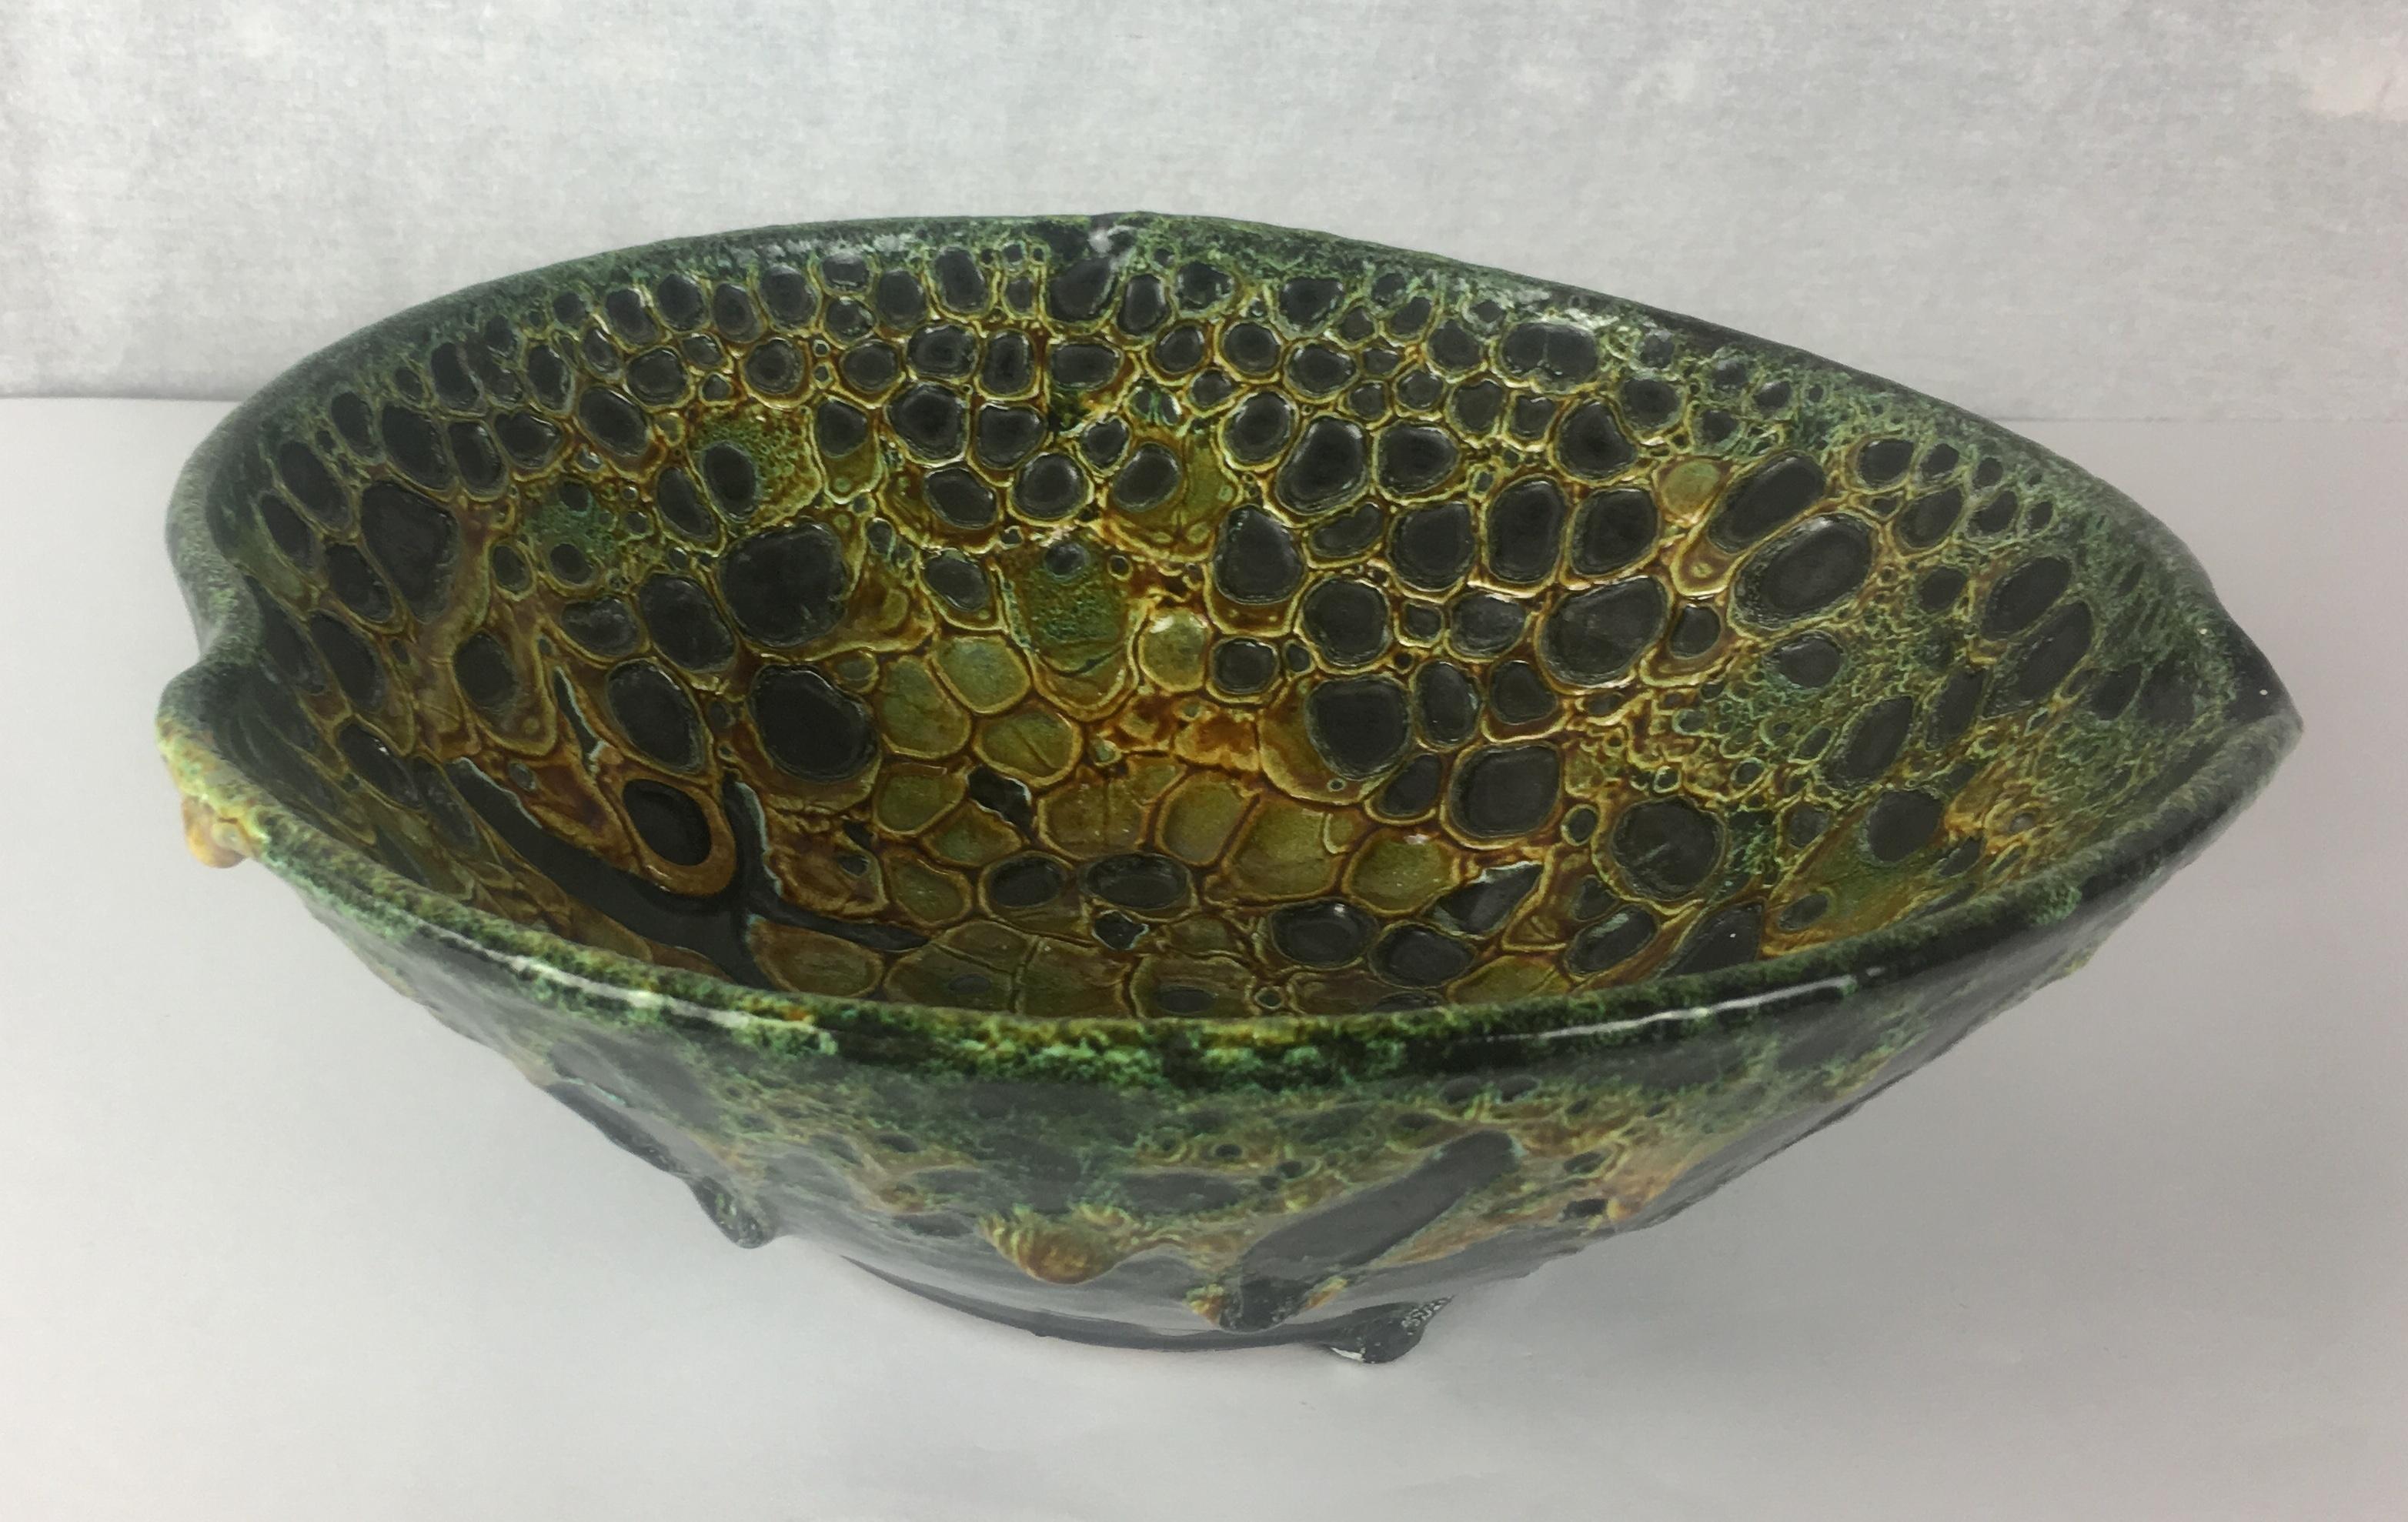 The distinctive glaze on this stunning bowl was developed by Charles Cart the founder of the Le Cyclope Pottery brand in Annecy-le-Vieux in the Haute Savoie area of France. The firing process reveals the black layer below the multicolored glaze in a